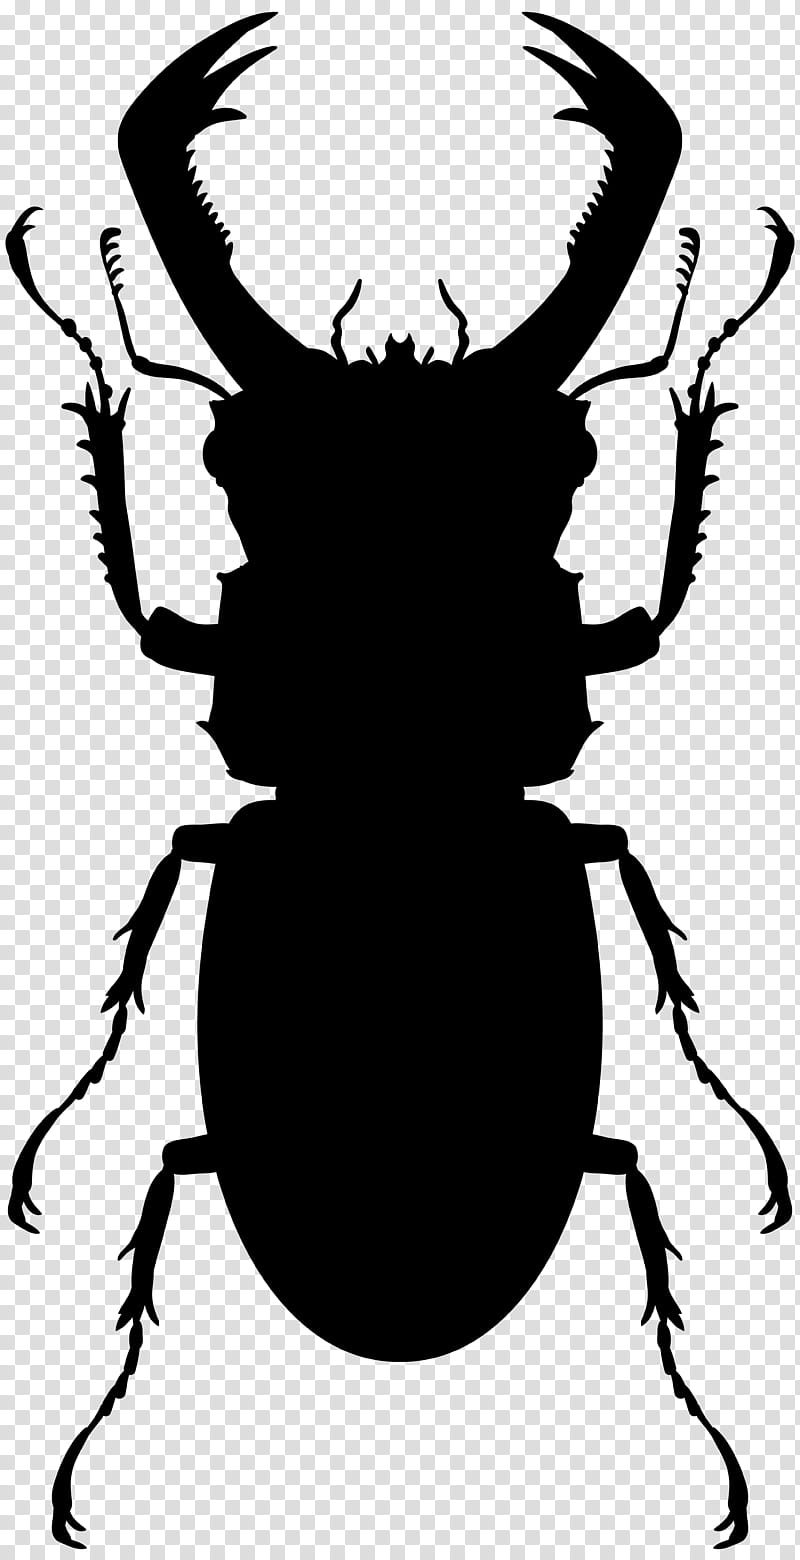 Elephant, Beetle, Hercules Beetle, Stag Beetle, Eastern Hercules Beetle, Japanese Rhinoceros Beetle, Elephant Beetle, Giant Stag transparent background PNG clipart